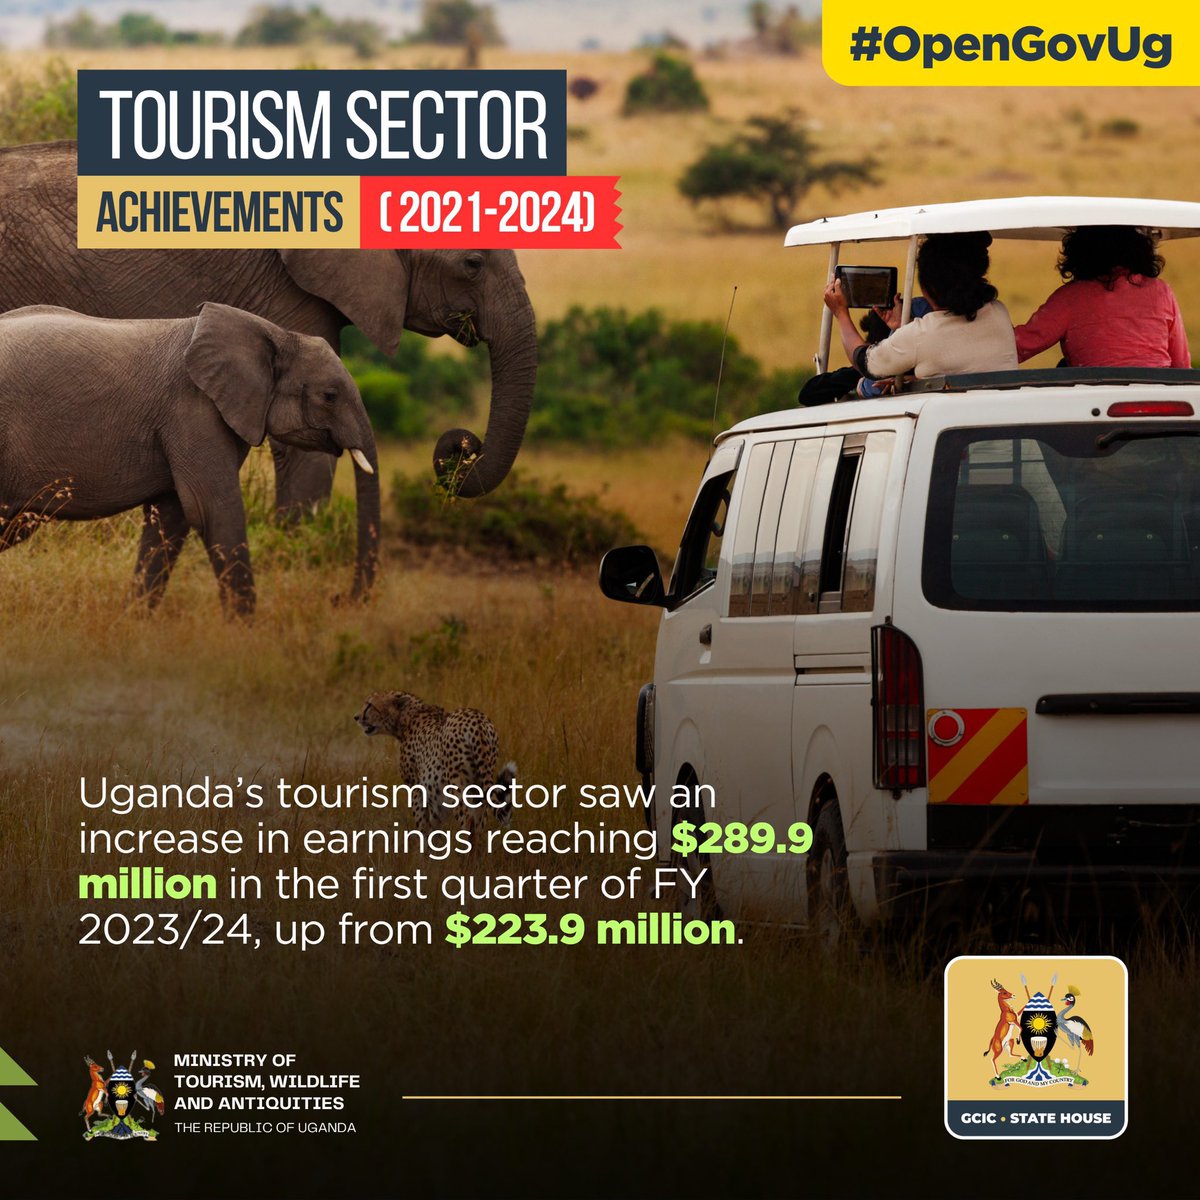 Uganda’s tourism sector is thriving, with earnings soaring to $289.9 million in Q1 FY 2023/24 from $223.9 million! #ExploreUganda #OpenGovUg